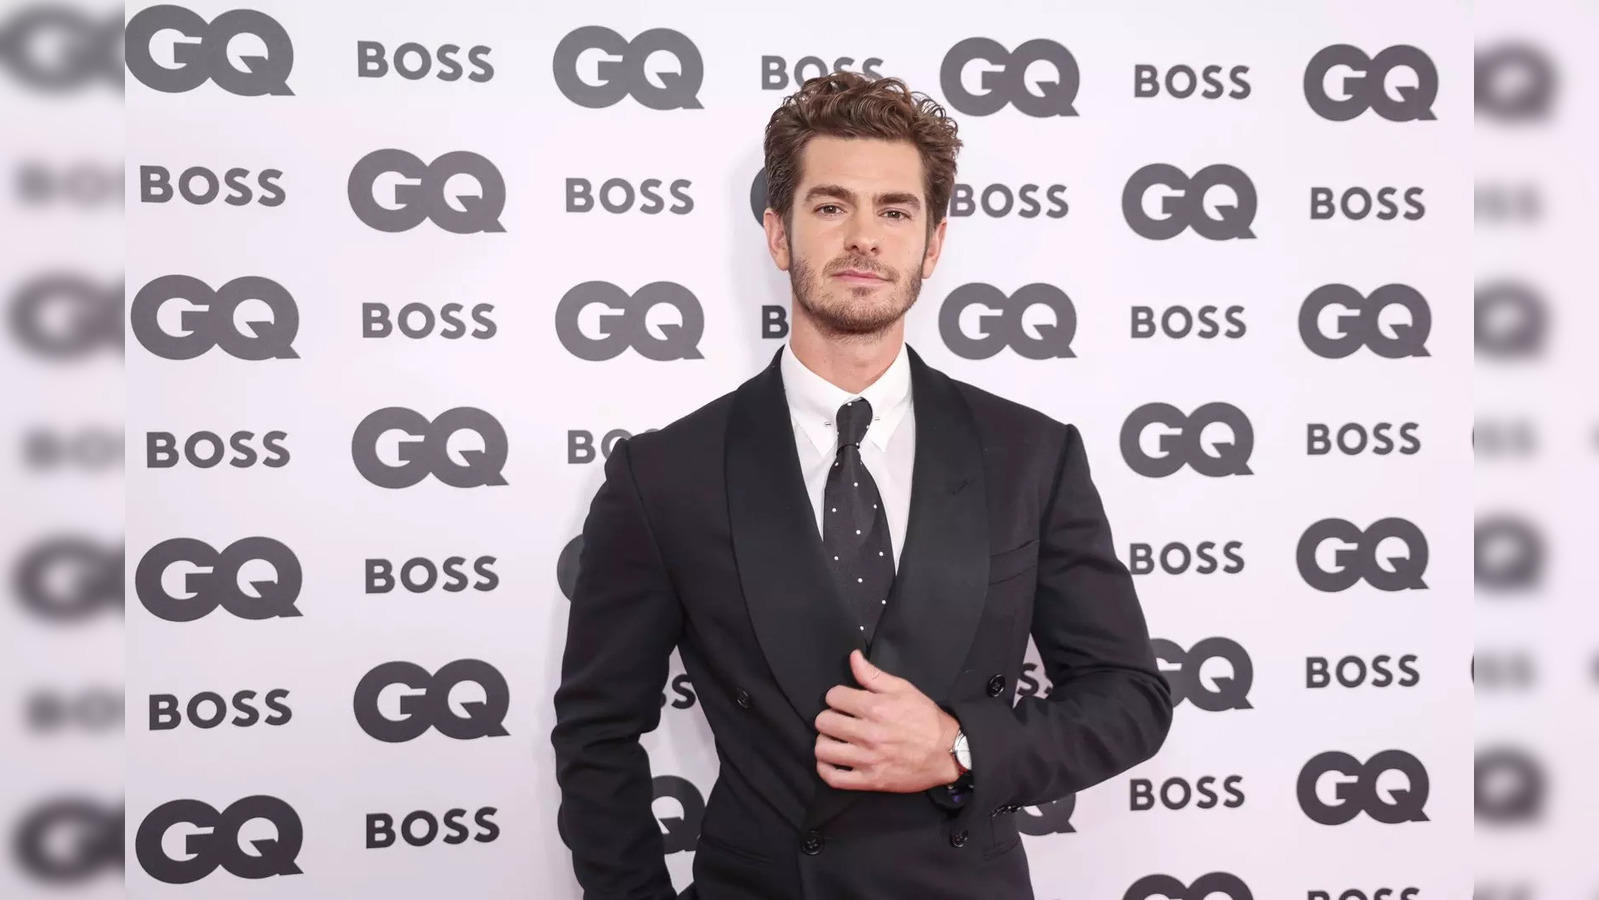 How celebs get nominated for gq awards